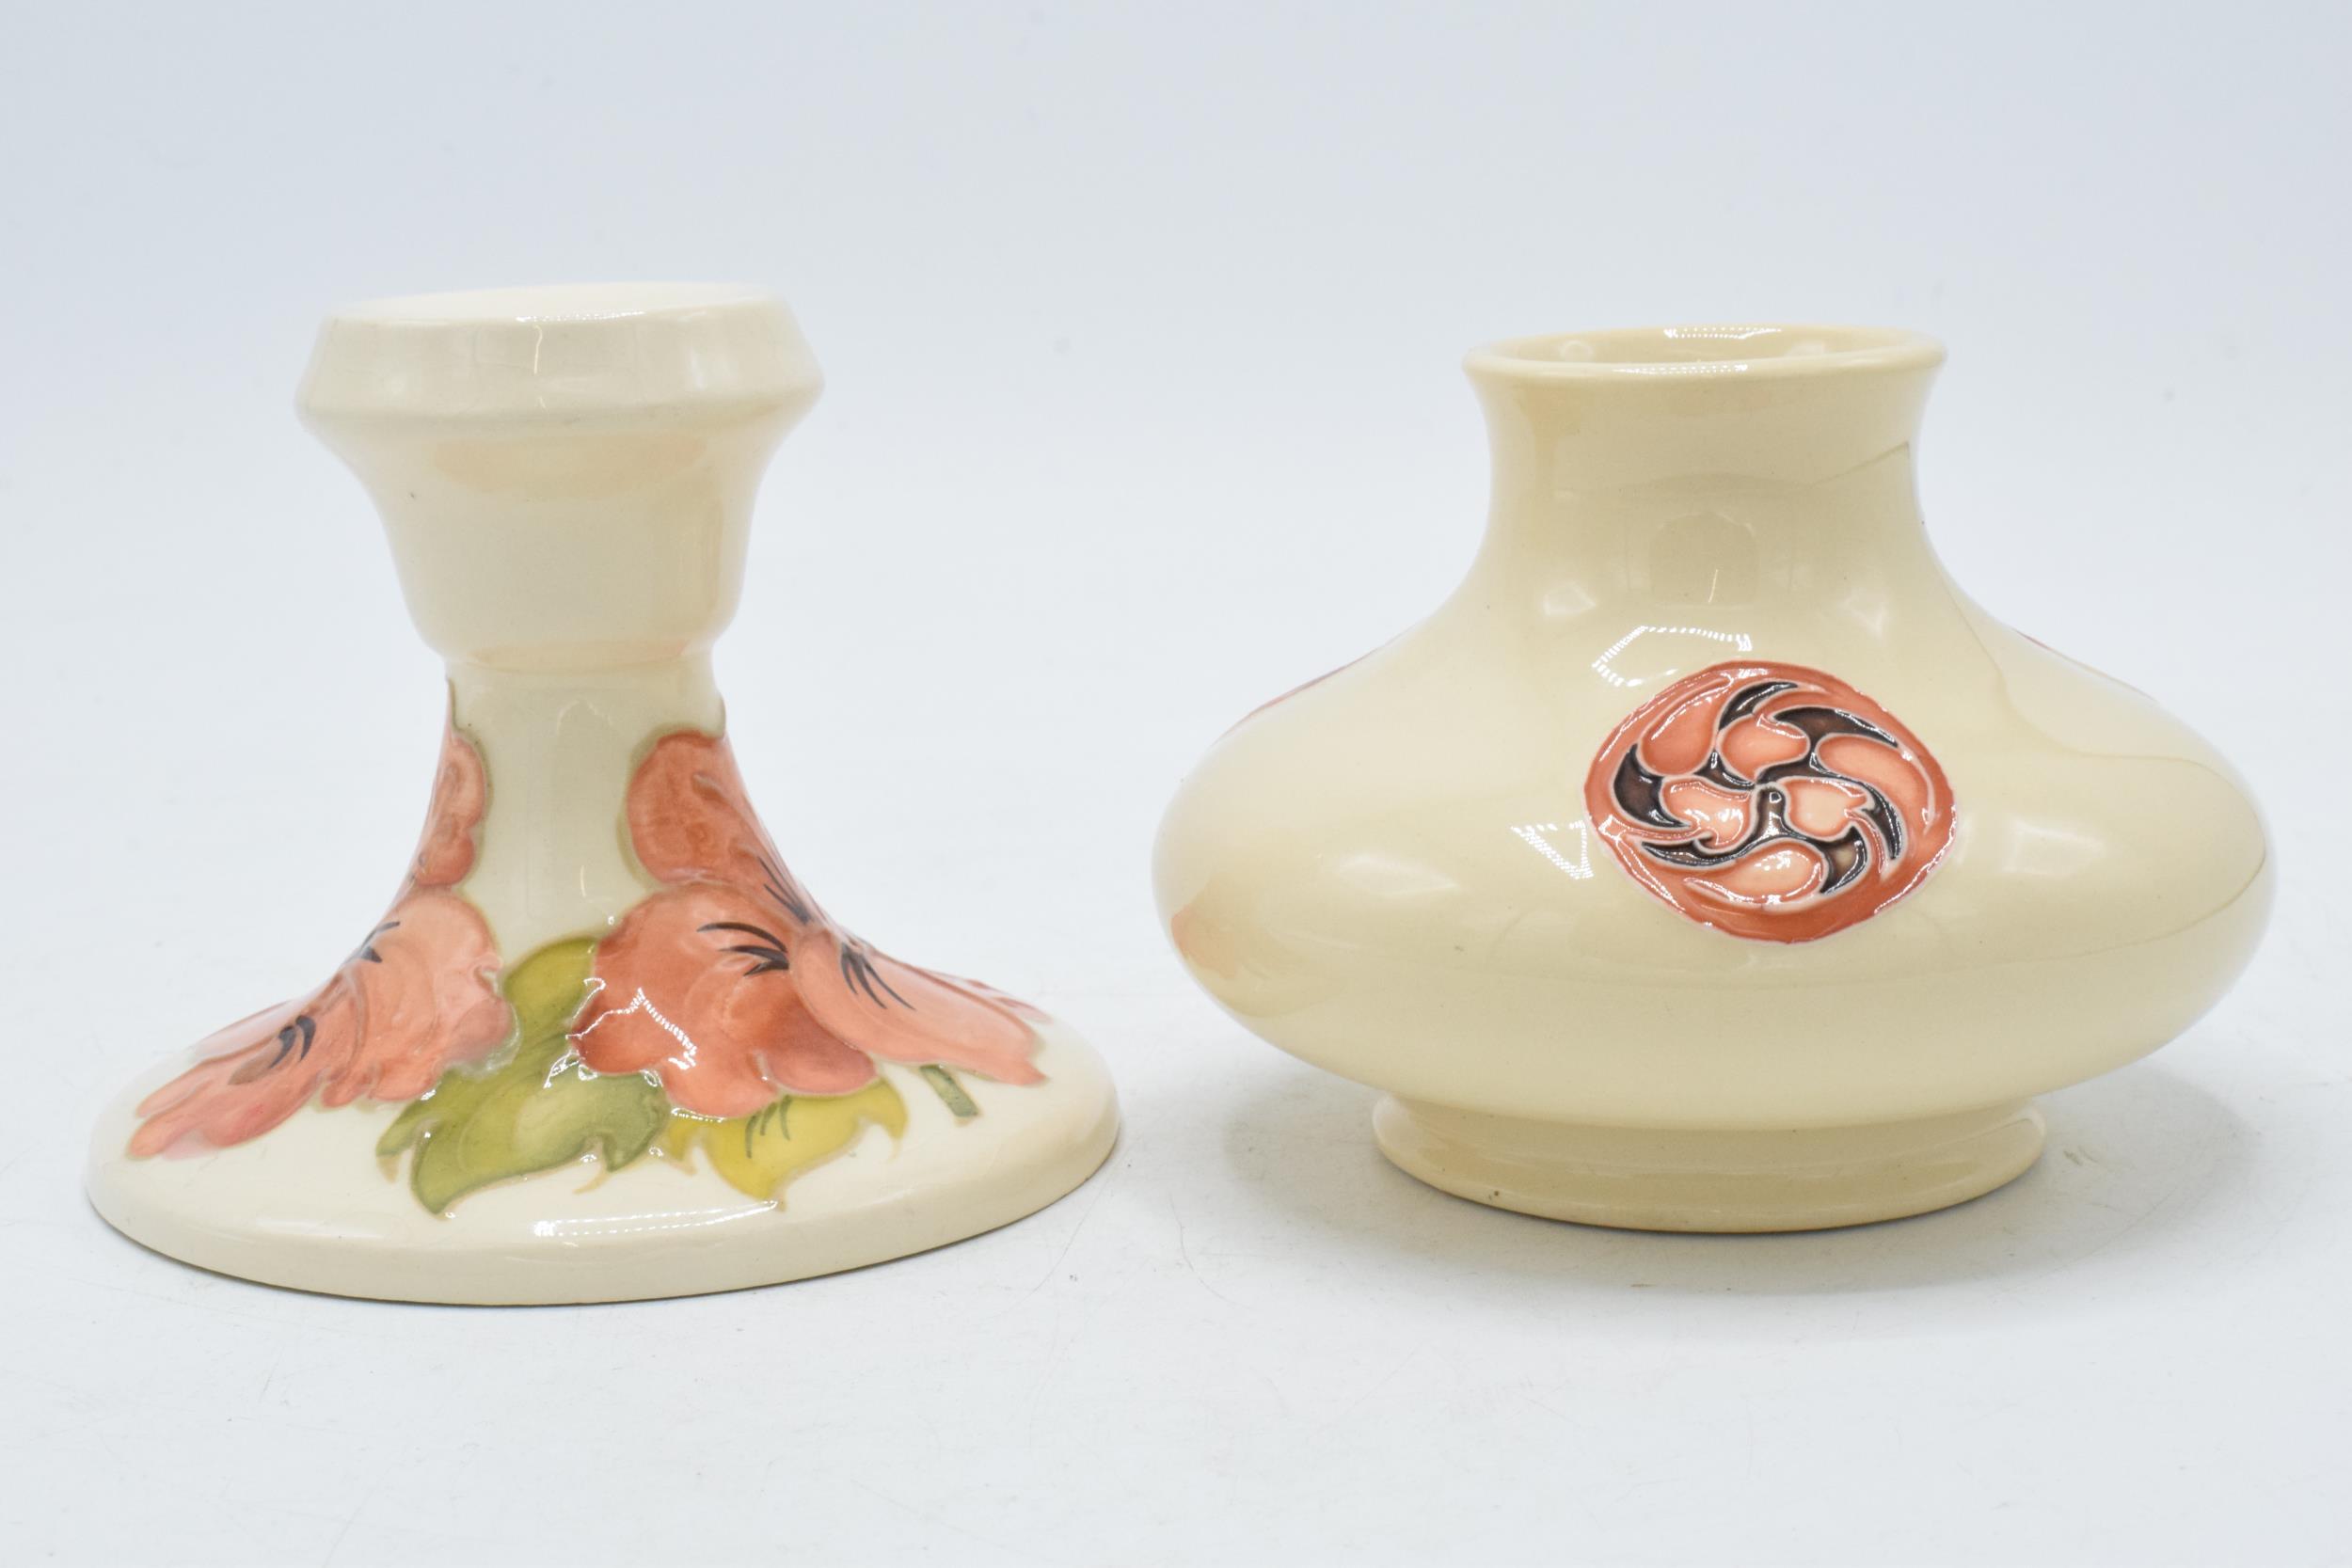 Moorcroft squat vase decorated with a Florian vase (red dot) together with Hibiscus candlestick (2).